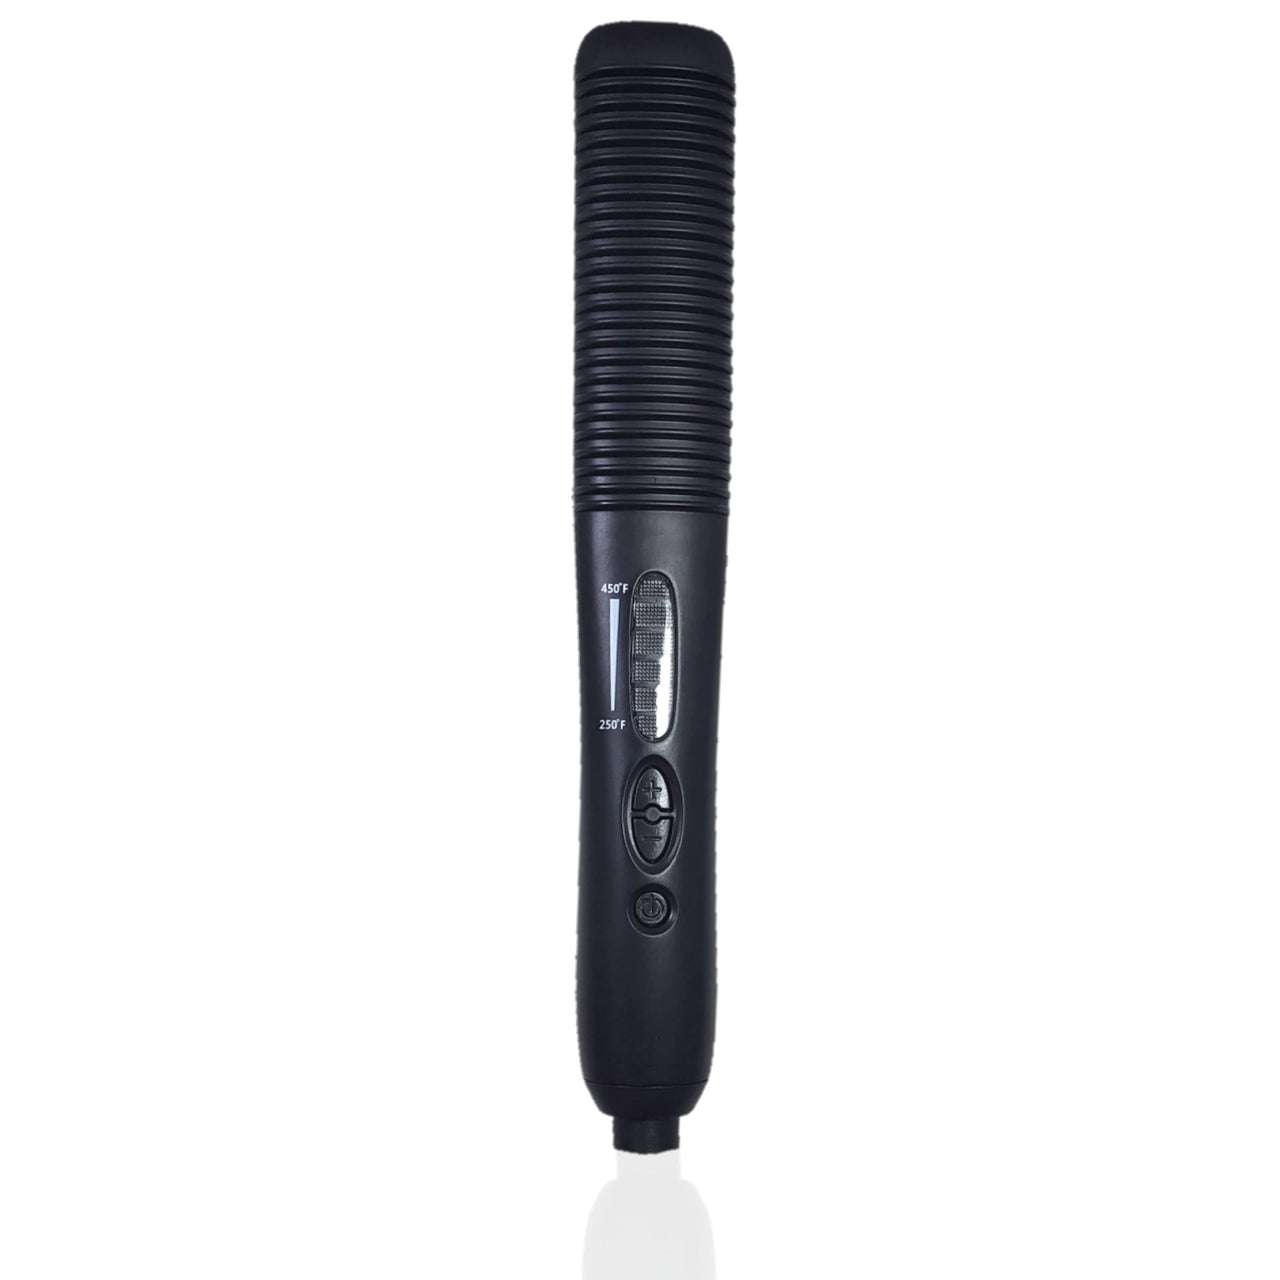 23 Ionic Ceramic Comb Plates Heated Brush Volumizes and Straightens Hair with Adjustable Temperature